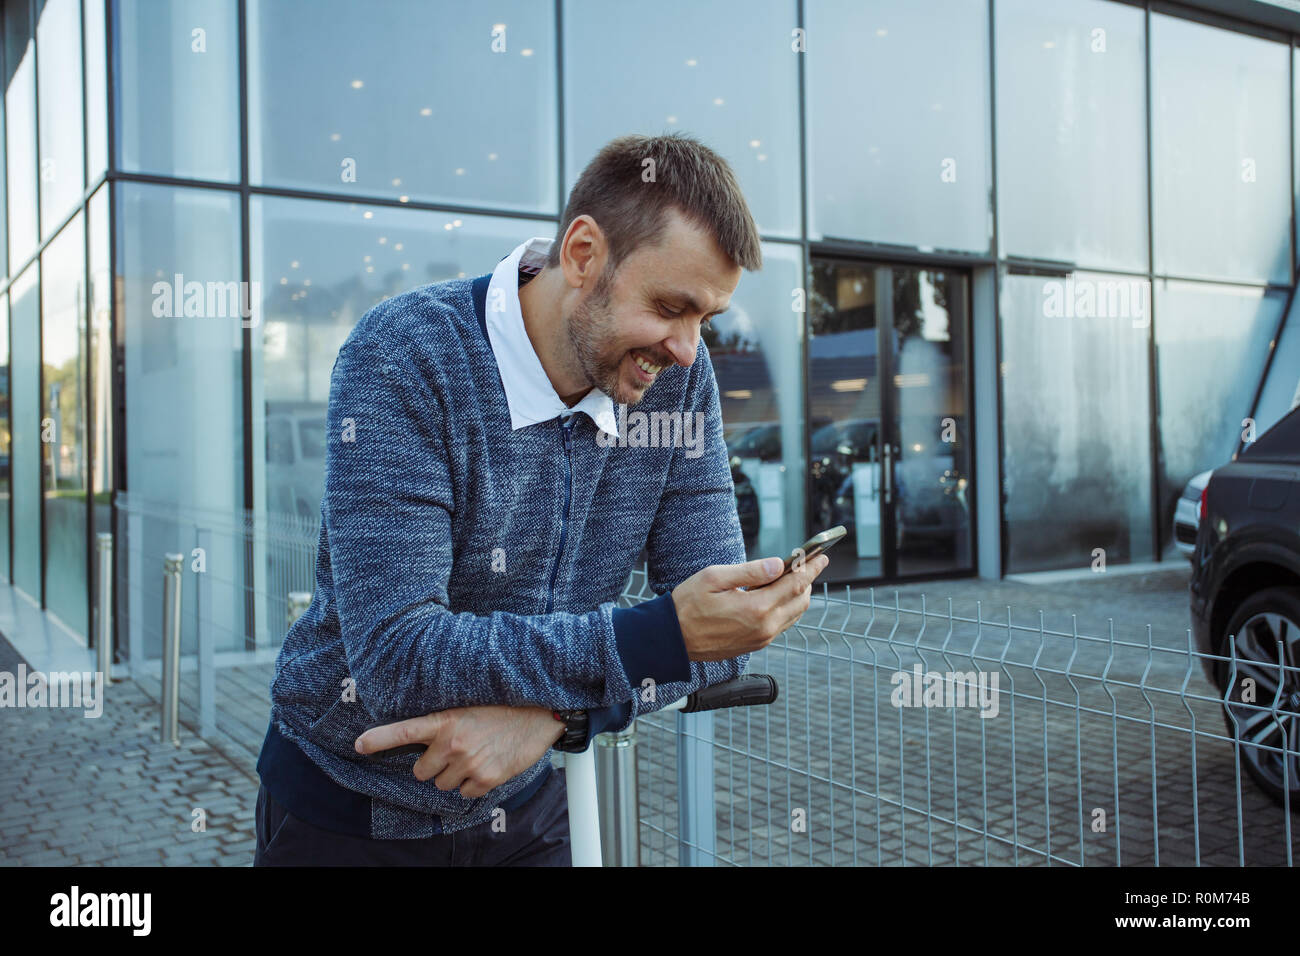 Young man holding coffee and smartphone posing at street and smiling Stock Photo